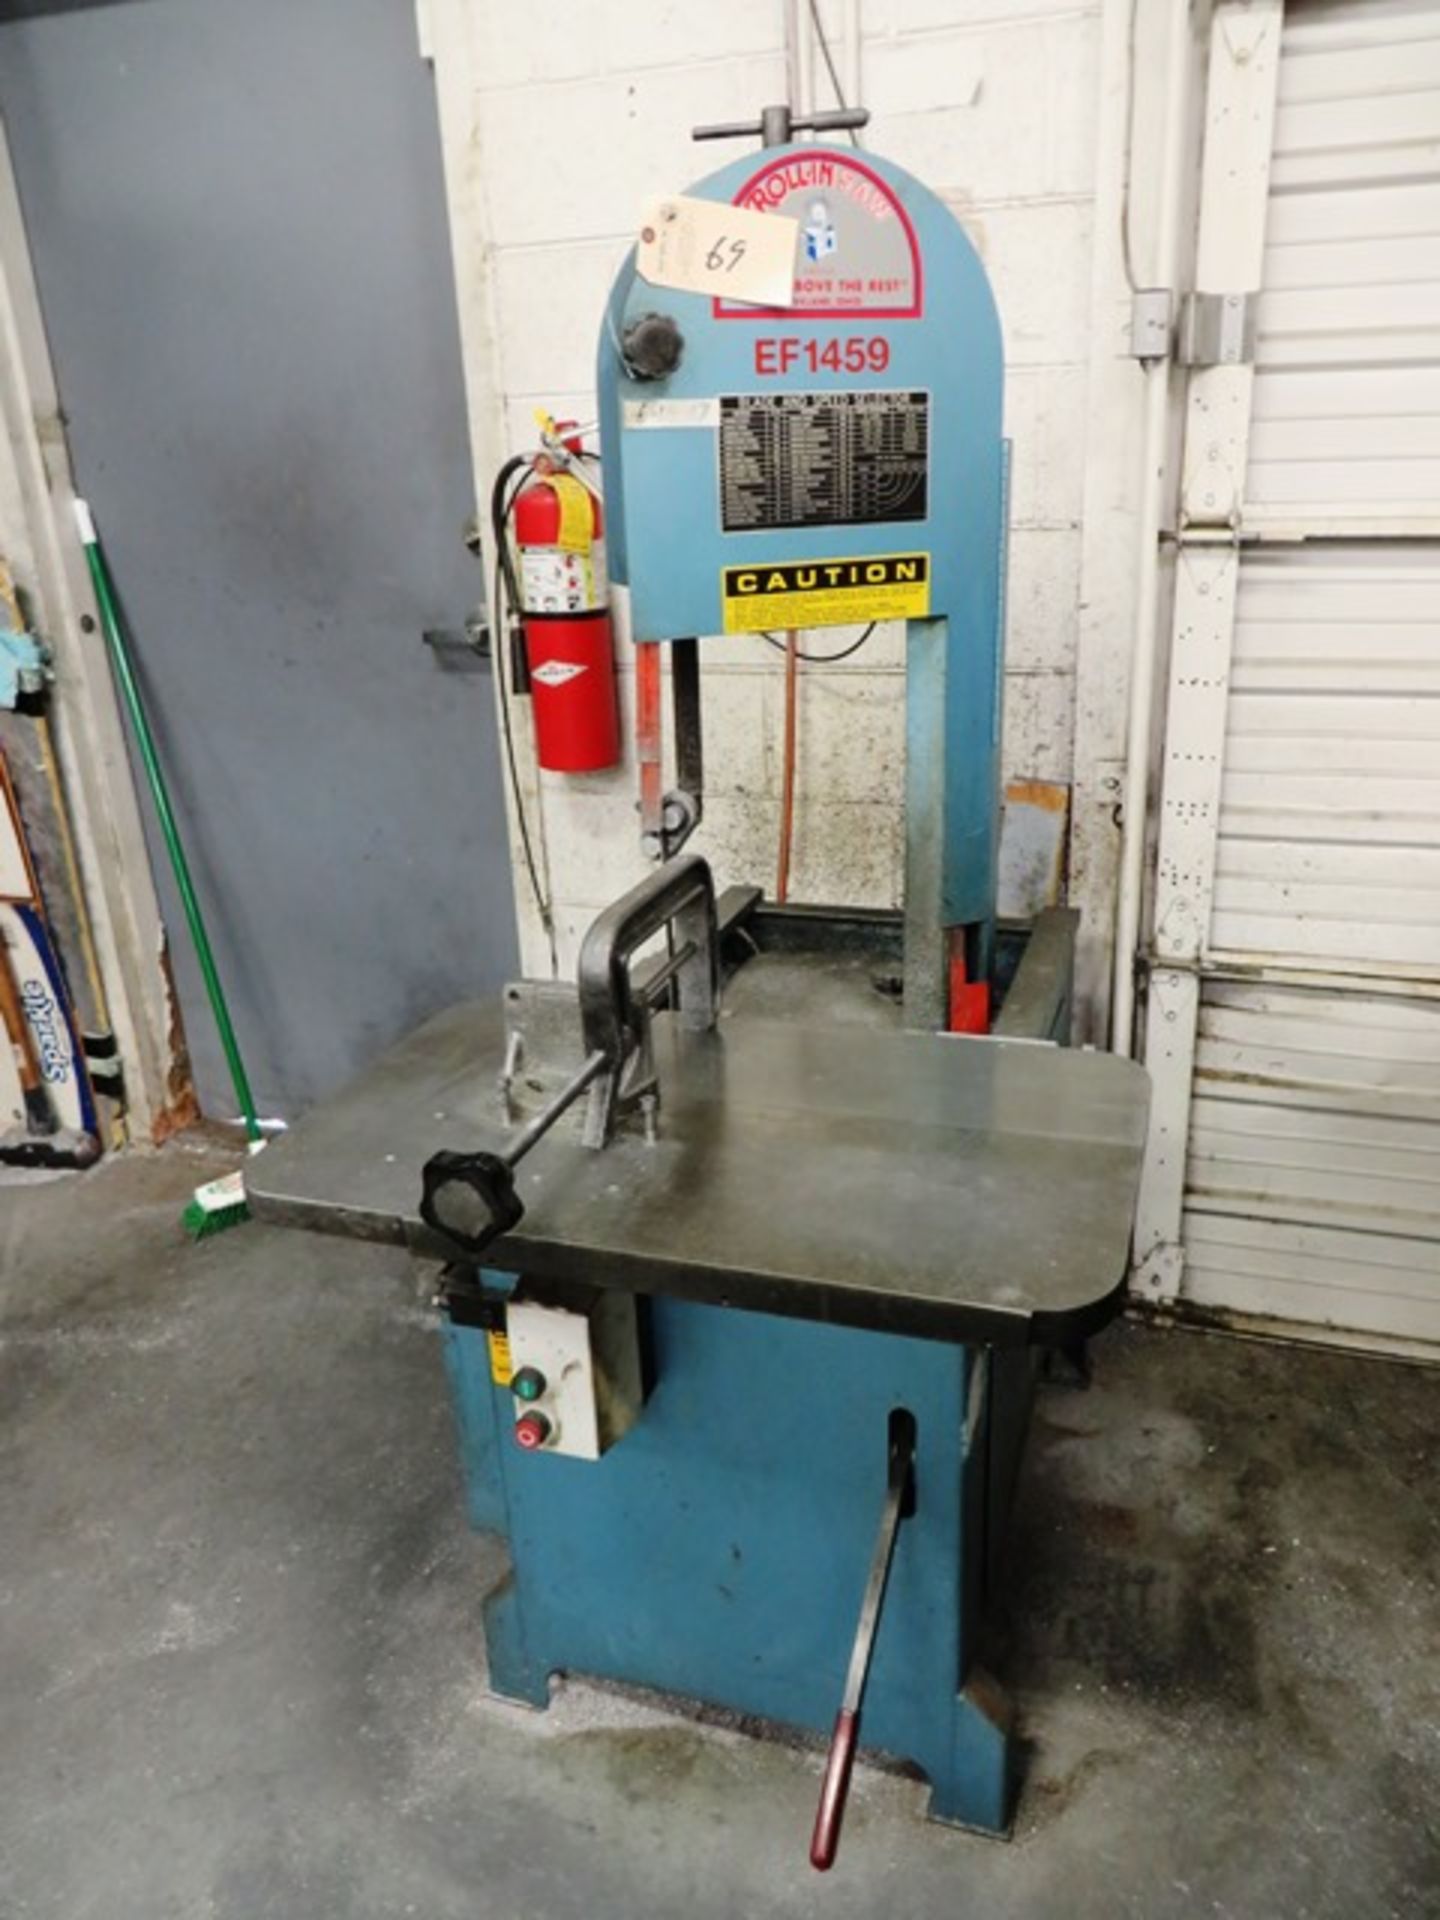 Roll-In Vertical Bandsaw EF1459 with Vise & Work Table